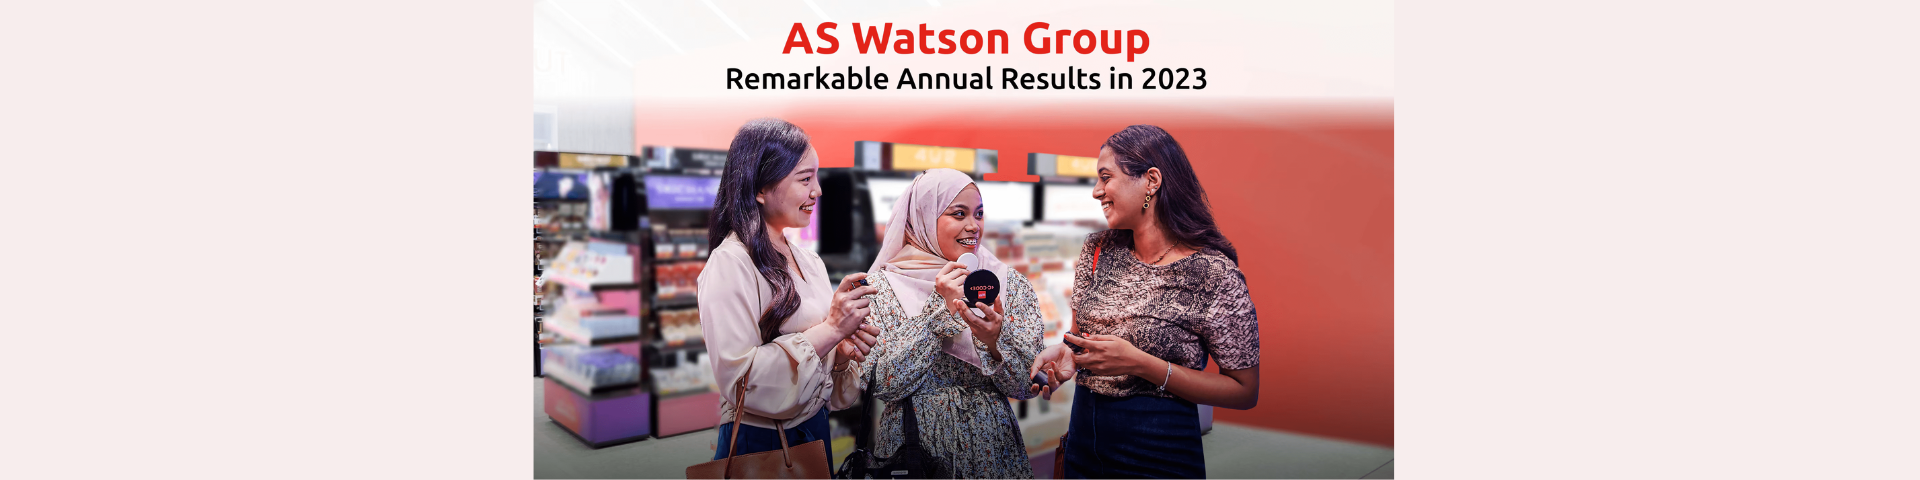 AS Watson Remarkable Annual Results in 2023